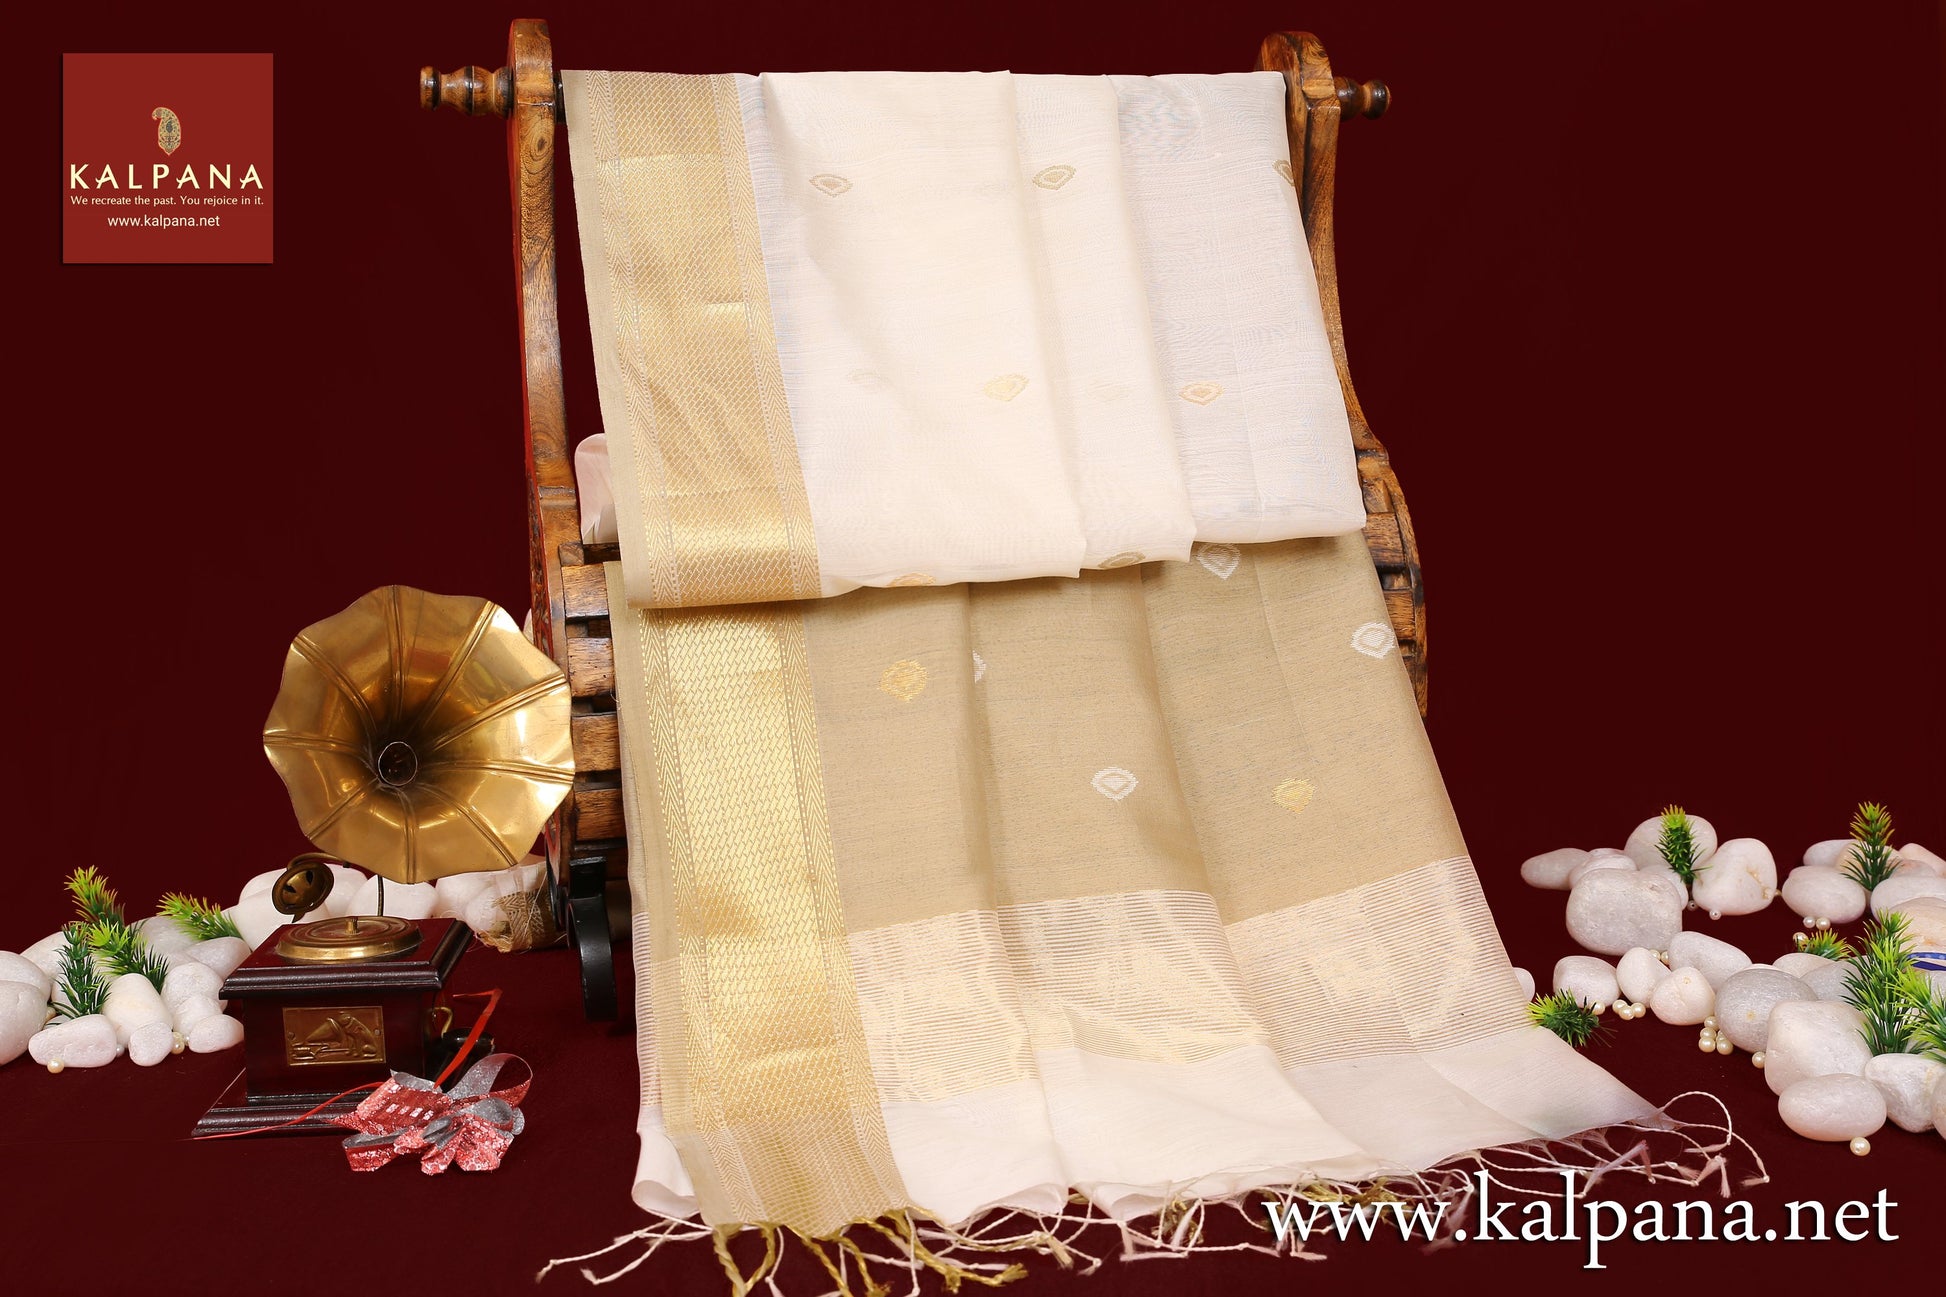 Maheshwari Handloom Pure Cotton Saree with All Over Motifs and Woven Zari Border. The Palla is  Woven Zari. It comes with Self Colored Plain Unstitched Blouse with Zari Border. Perfect for Multi Occasion Wear.  Recommended for Summer season(s). Dry Clean Only